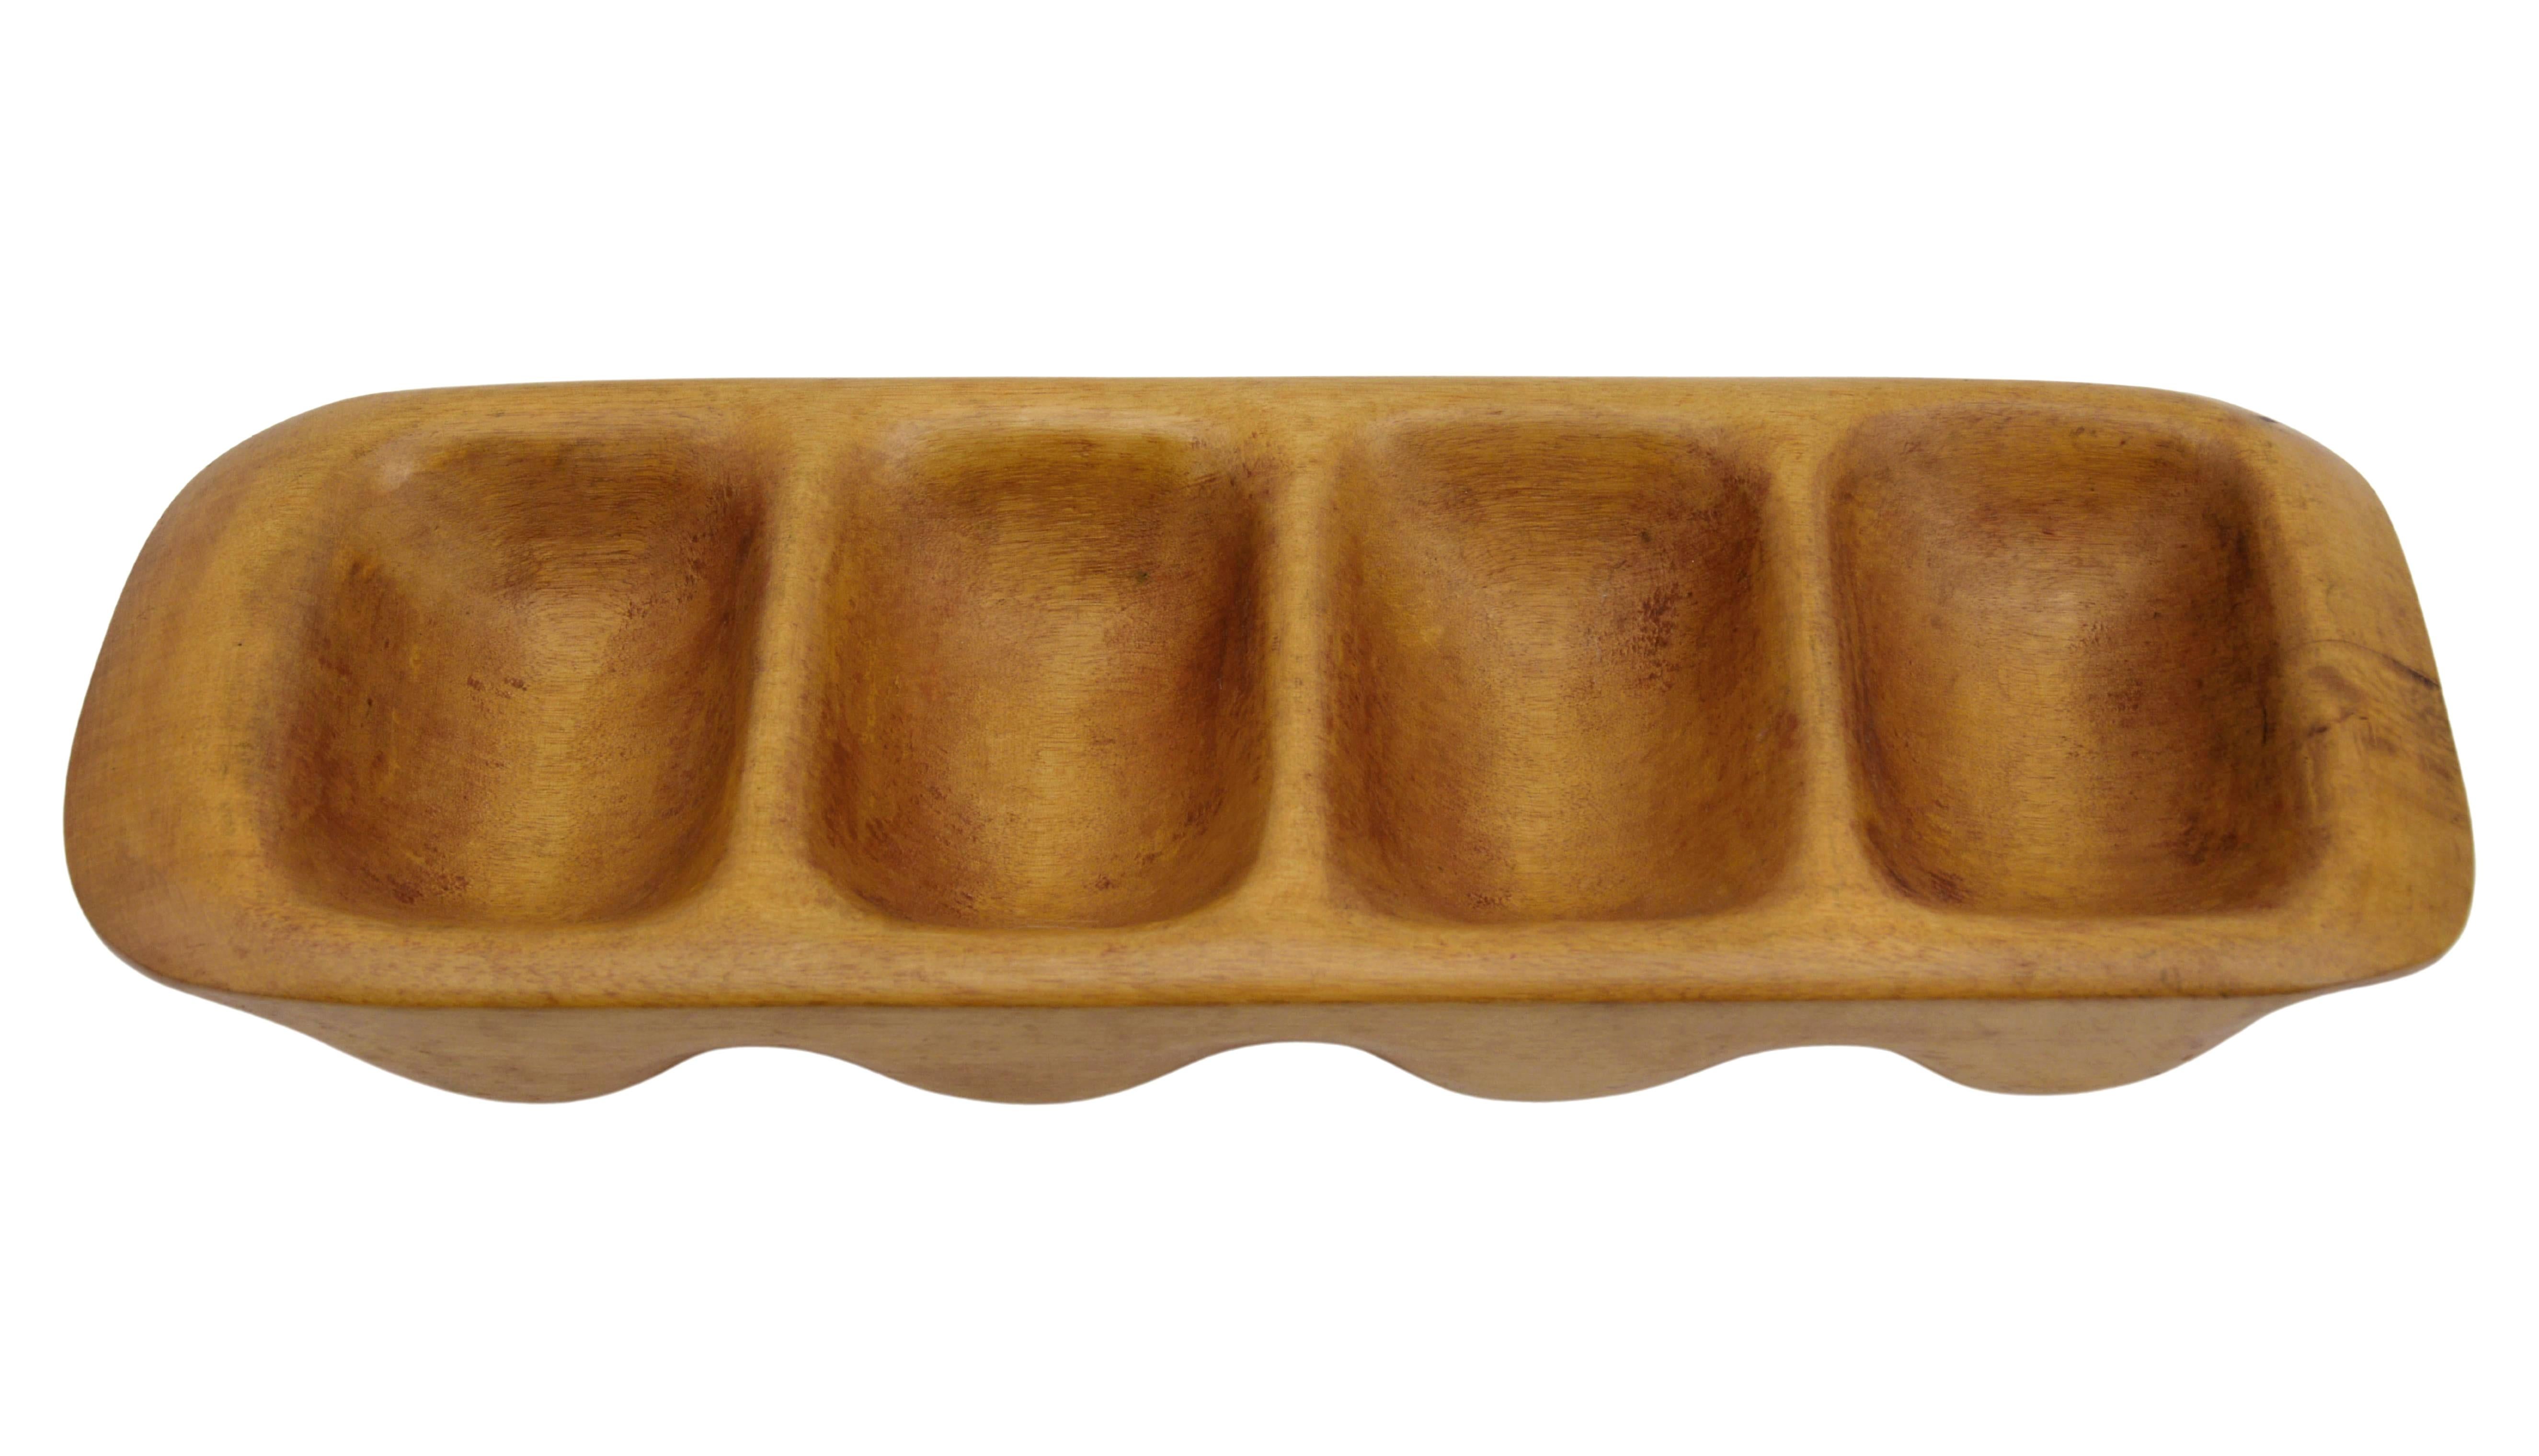 Large wooden tidy by Max Méder in the style of Alexandre Noll, Paris, France, 1950s. Vide-poches hand carved in a single piece of solid wood. Signed under the base: 